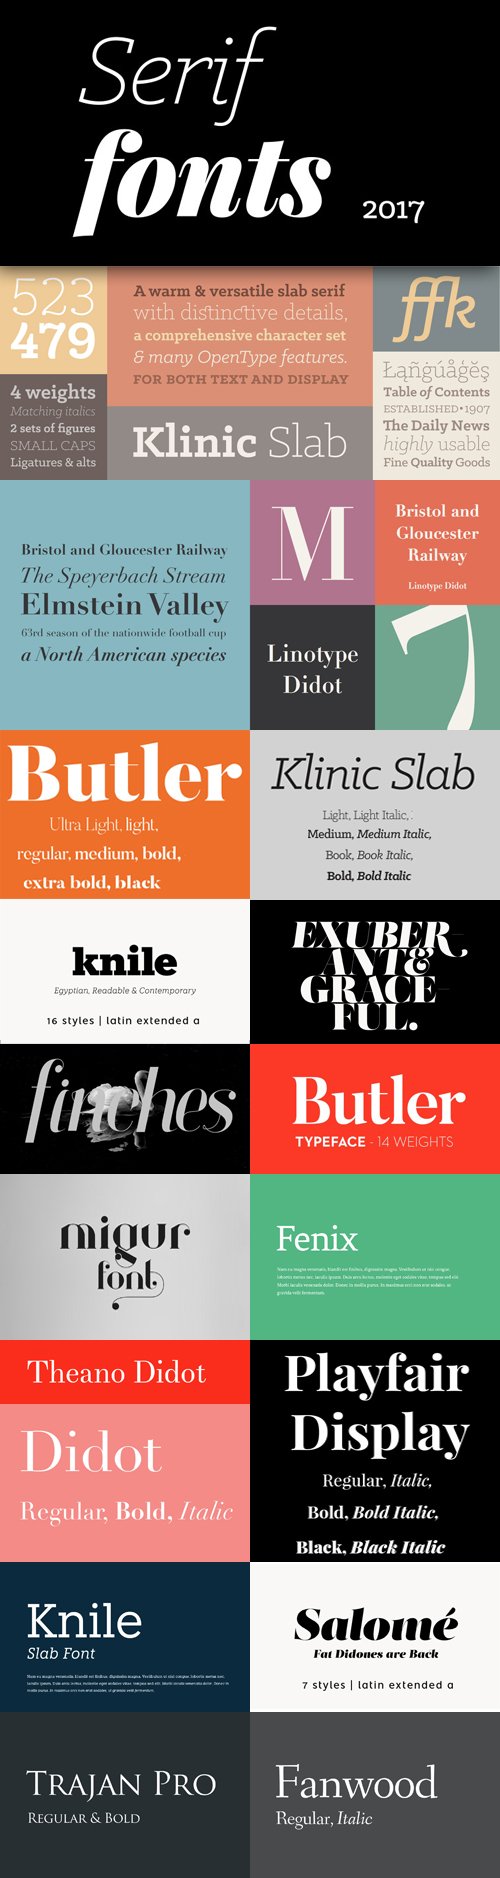 12 Best Serif Fonts to Use in 2017